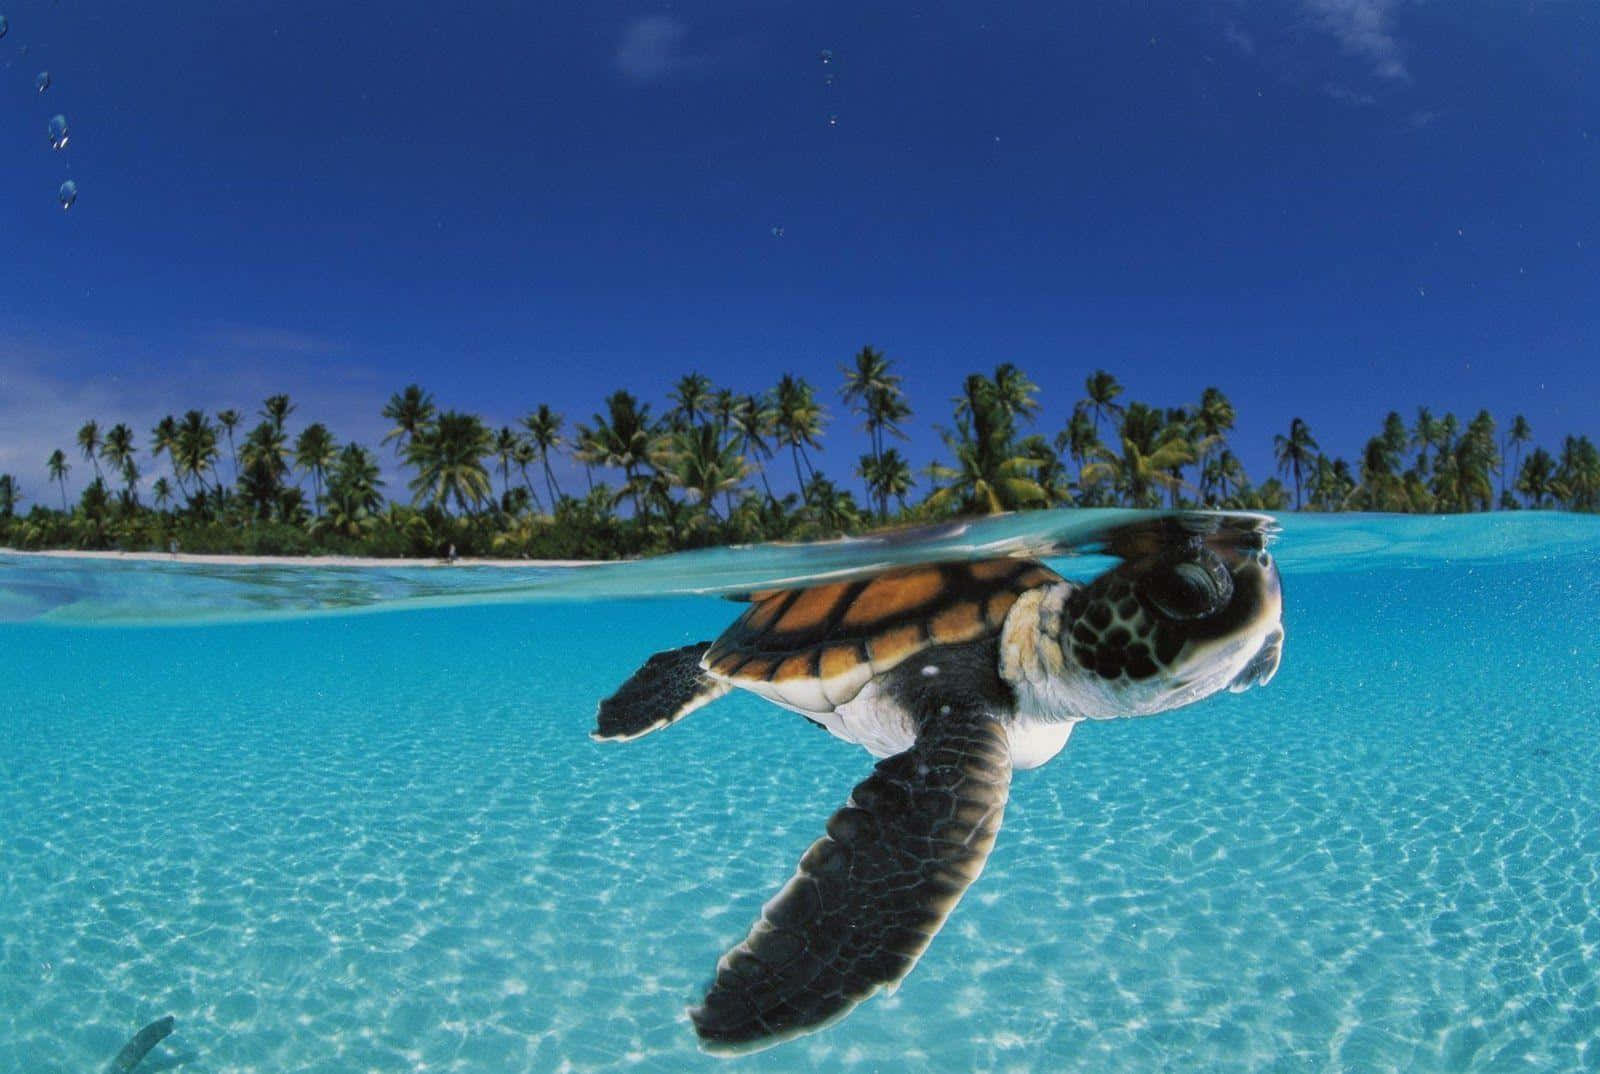 a baby turtle swimming in clear water with palm trees